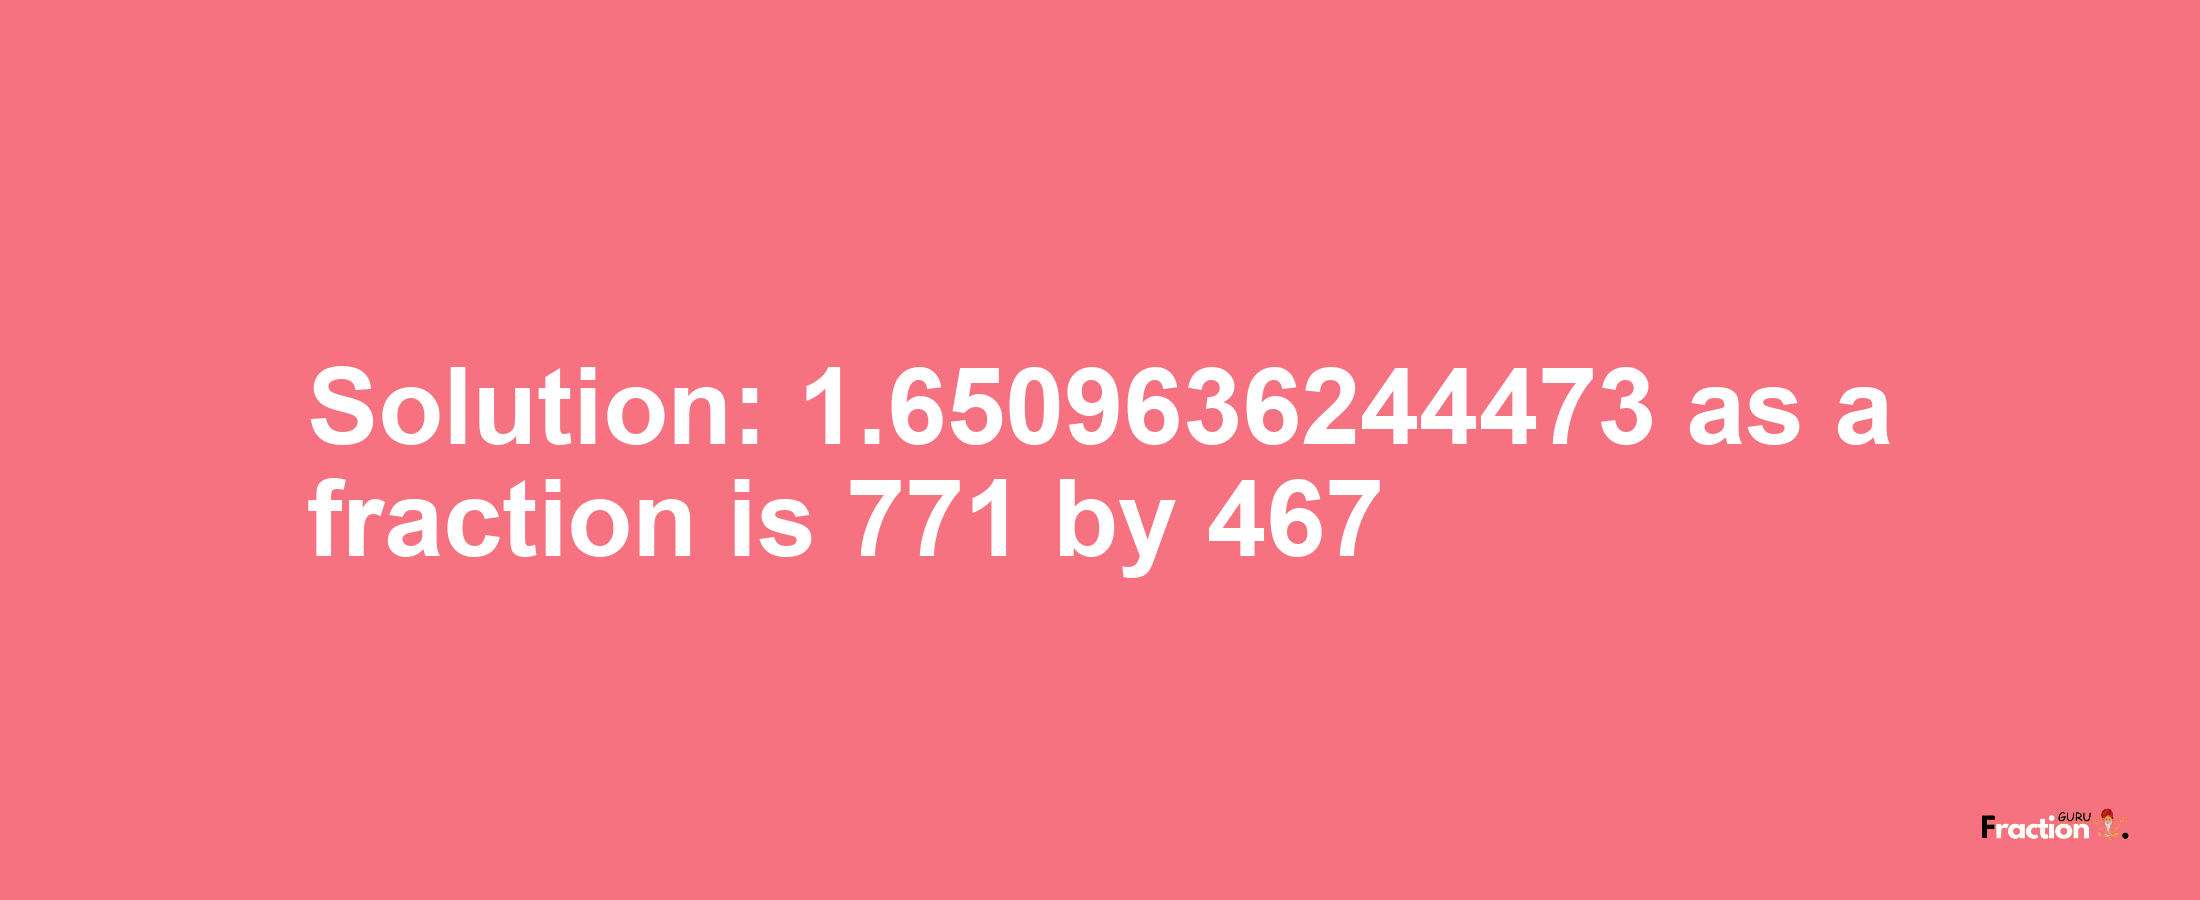 Solution:1.6509636244473 as a fraction is 771/467